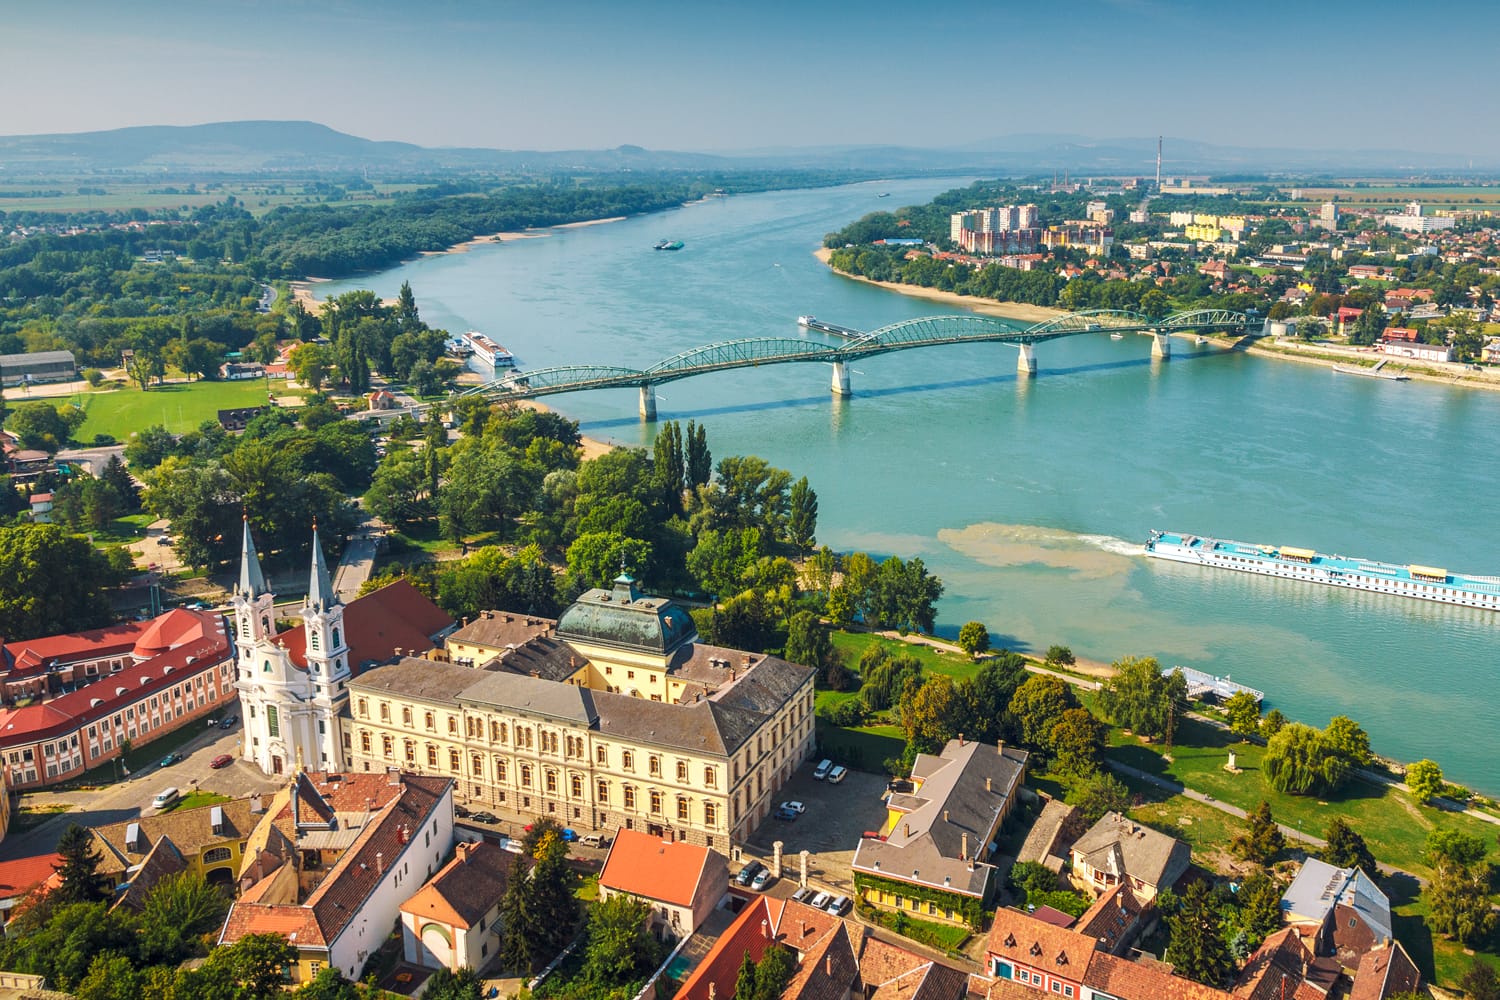 View of the Hungarian historic town from the basilica in Esztergom, the Danube river and the border bridge to the town of Sturovo in Slovakia.